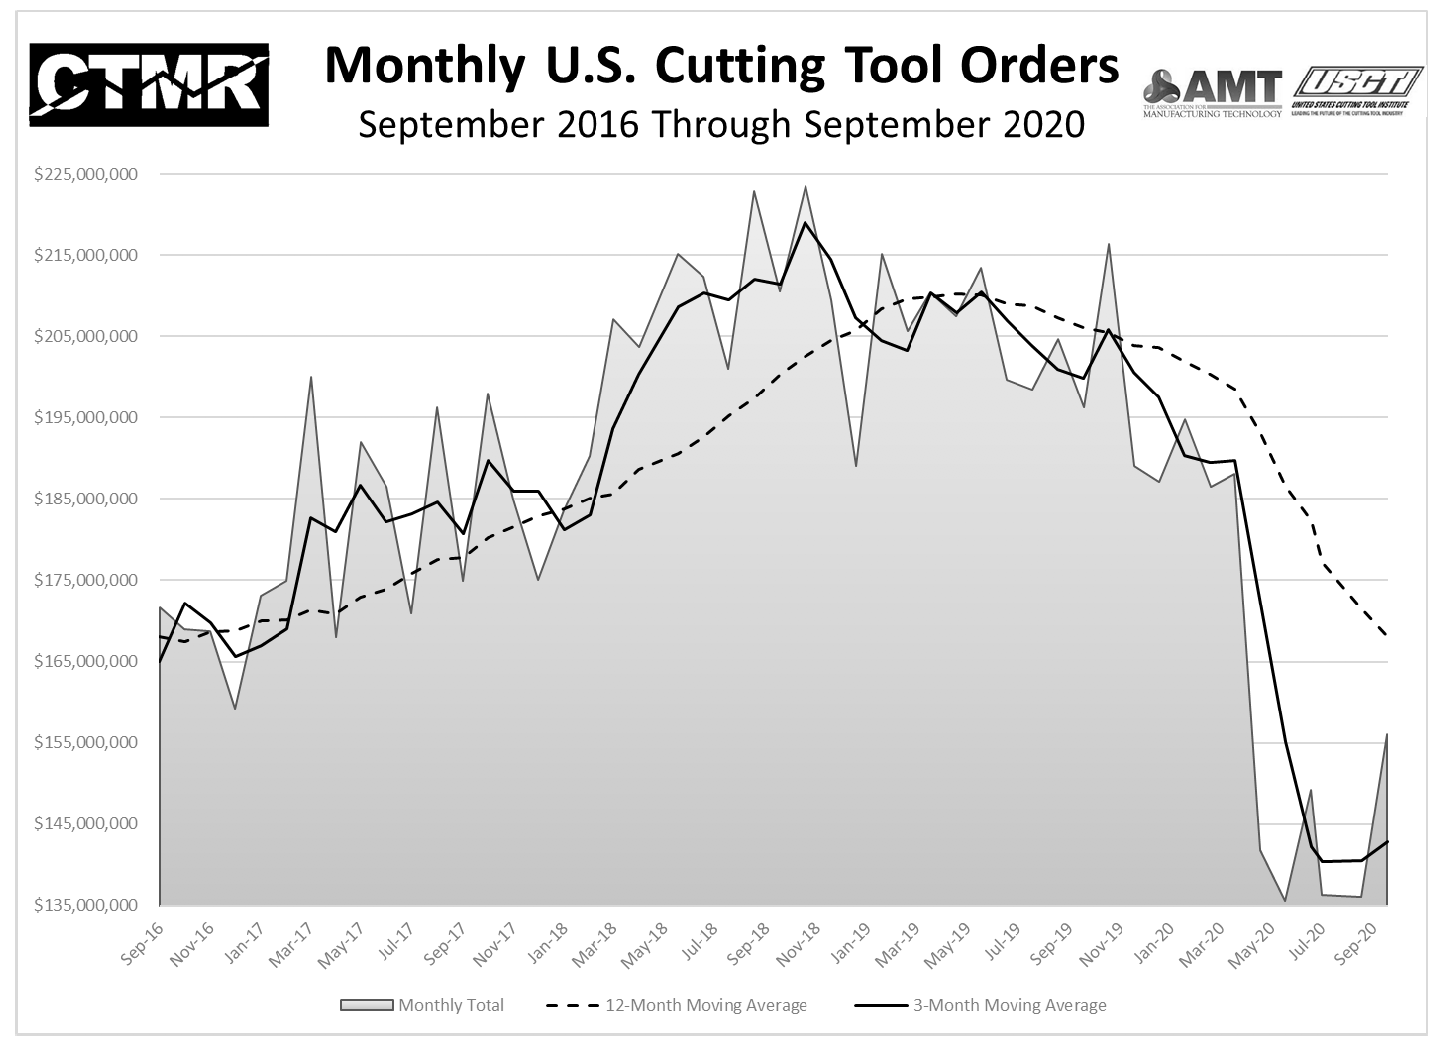 The graph includes the 12-month moving average for the durable goods shipments and cutting tool orders. These values are calculated by taking the average of the most recent 12 months and plotting them over time. 